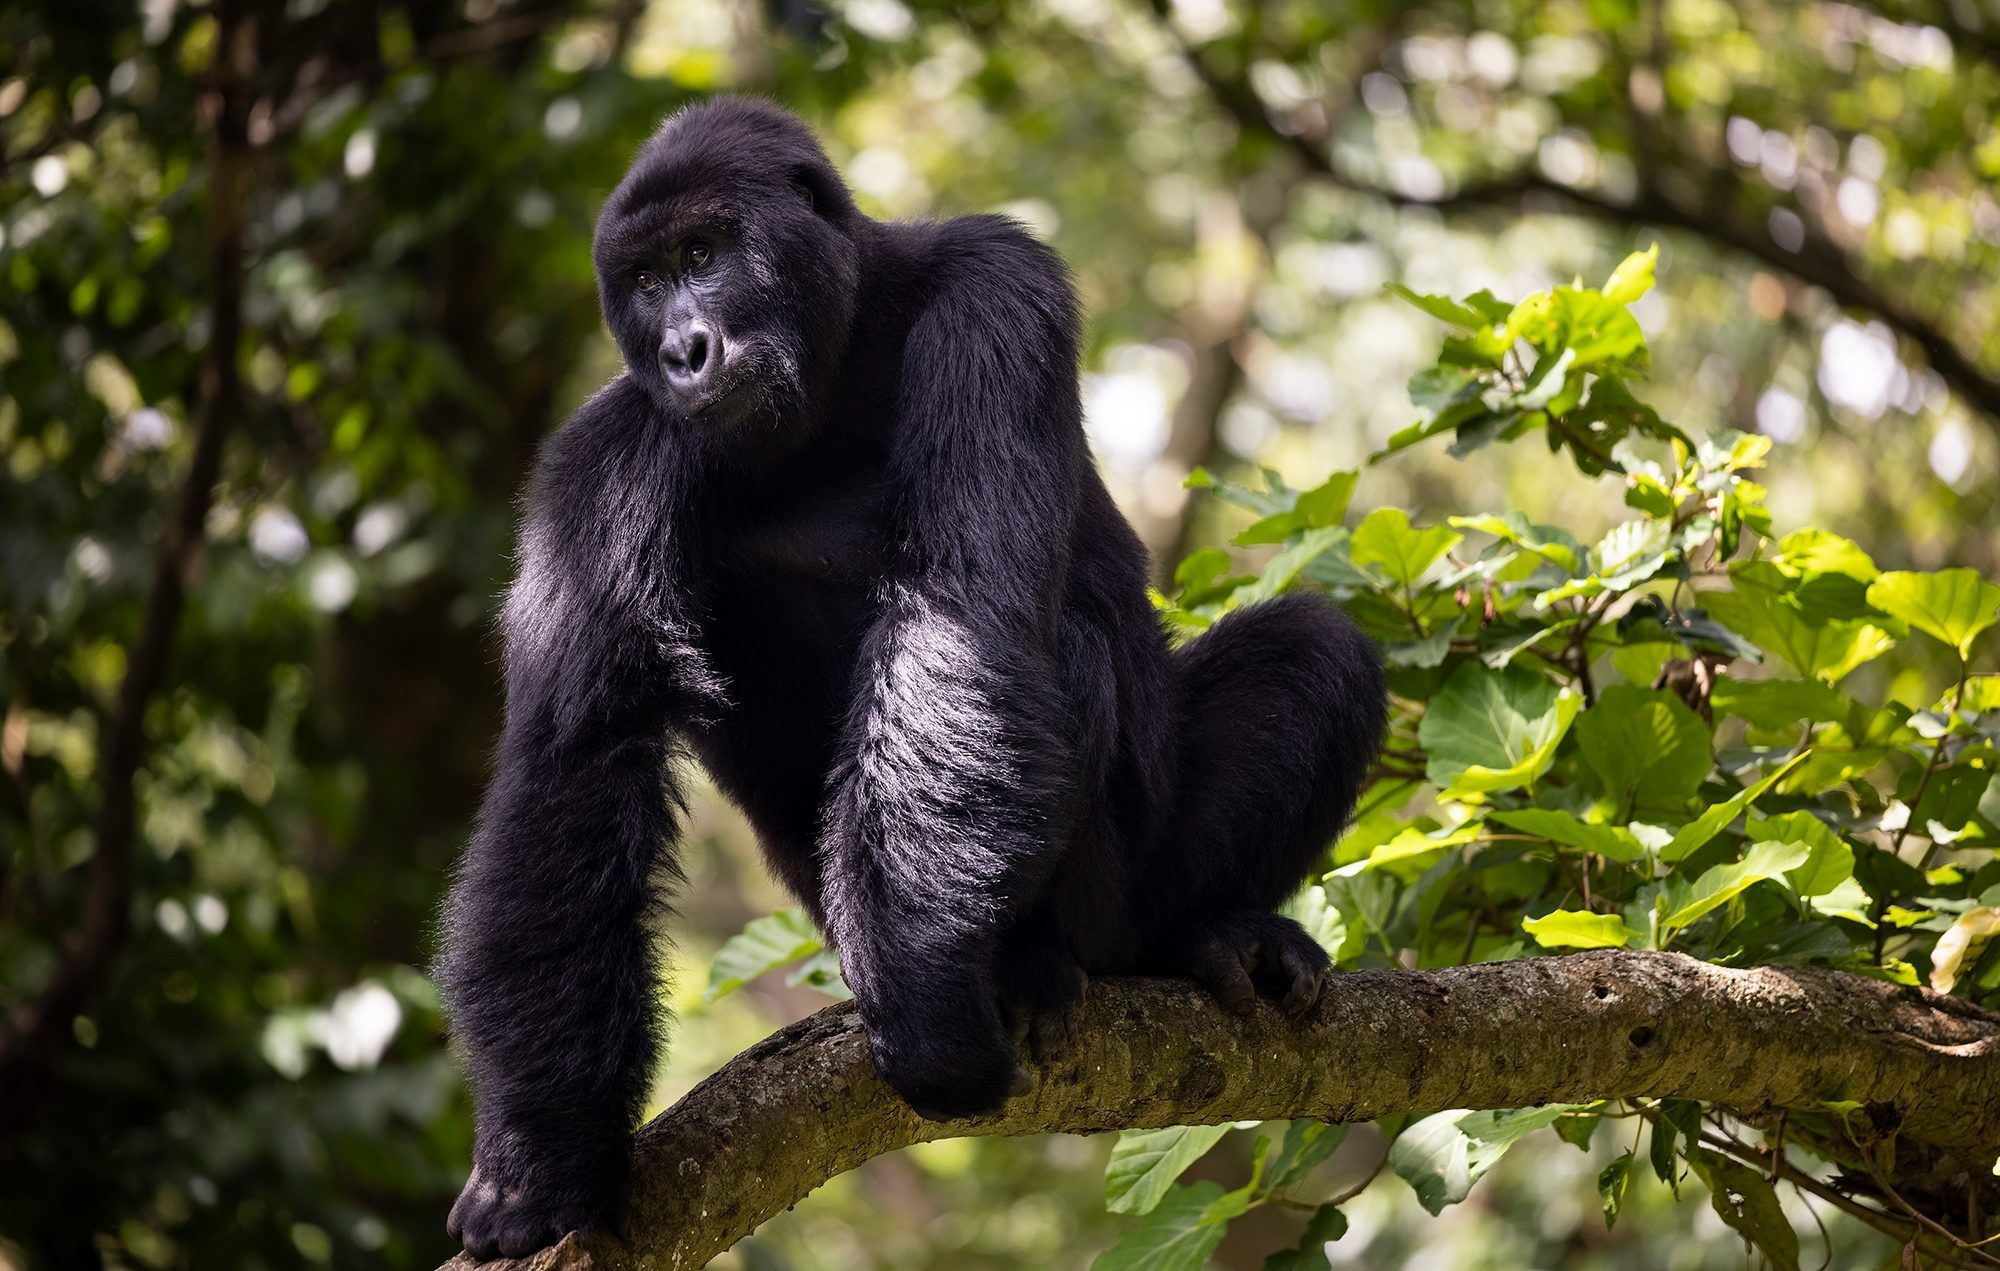 Adopt a gorilla, Conservation efforts, Protected sanctuary, Wildlife support, 2000x1280 HD Desktop